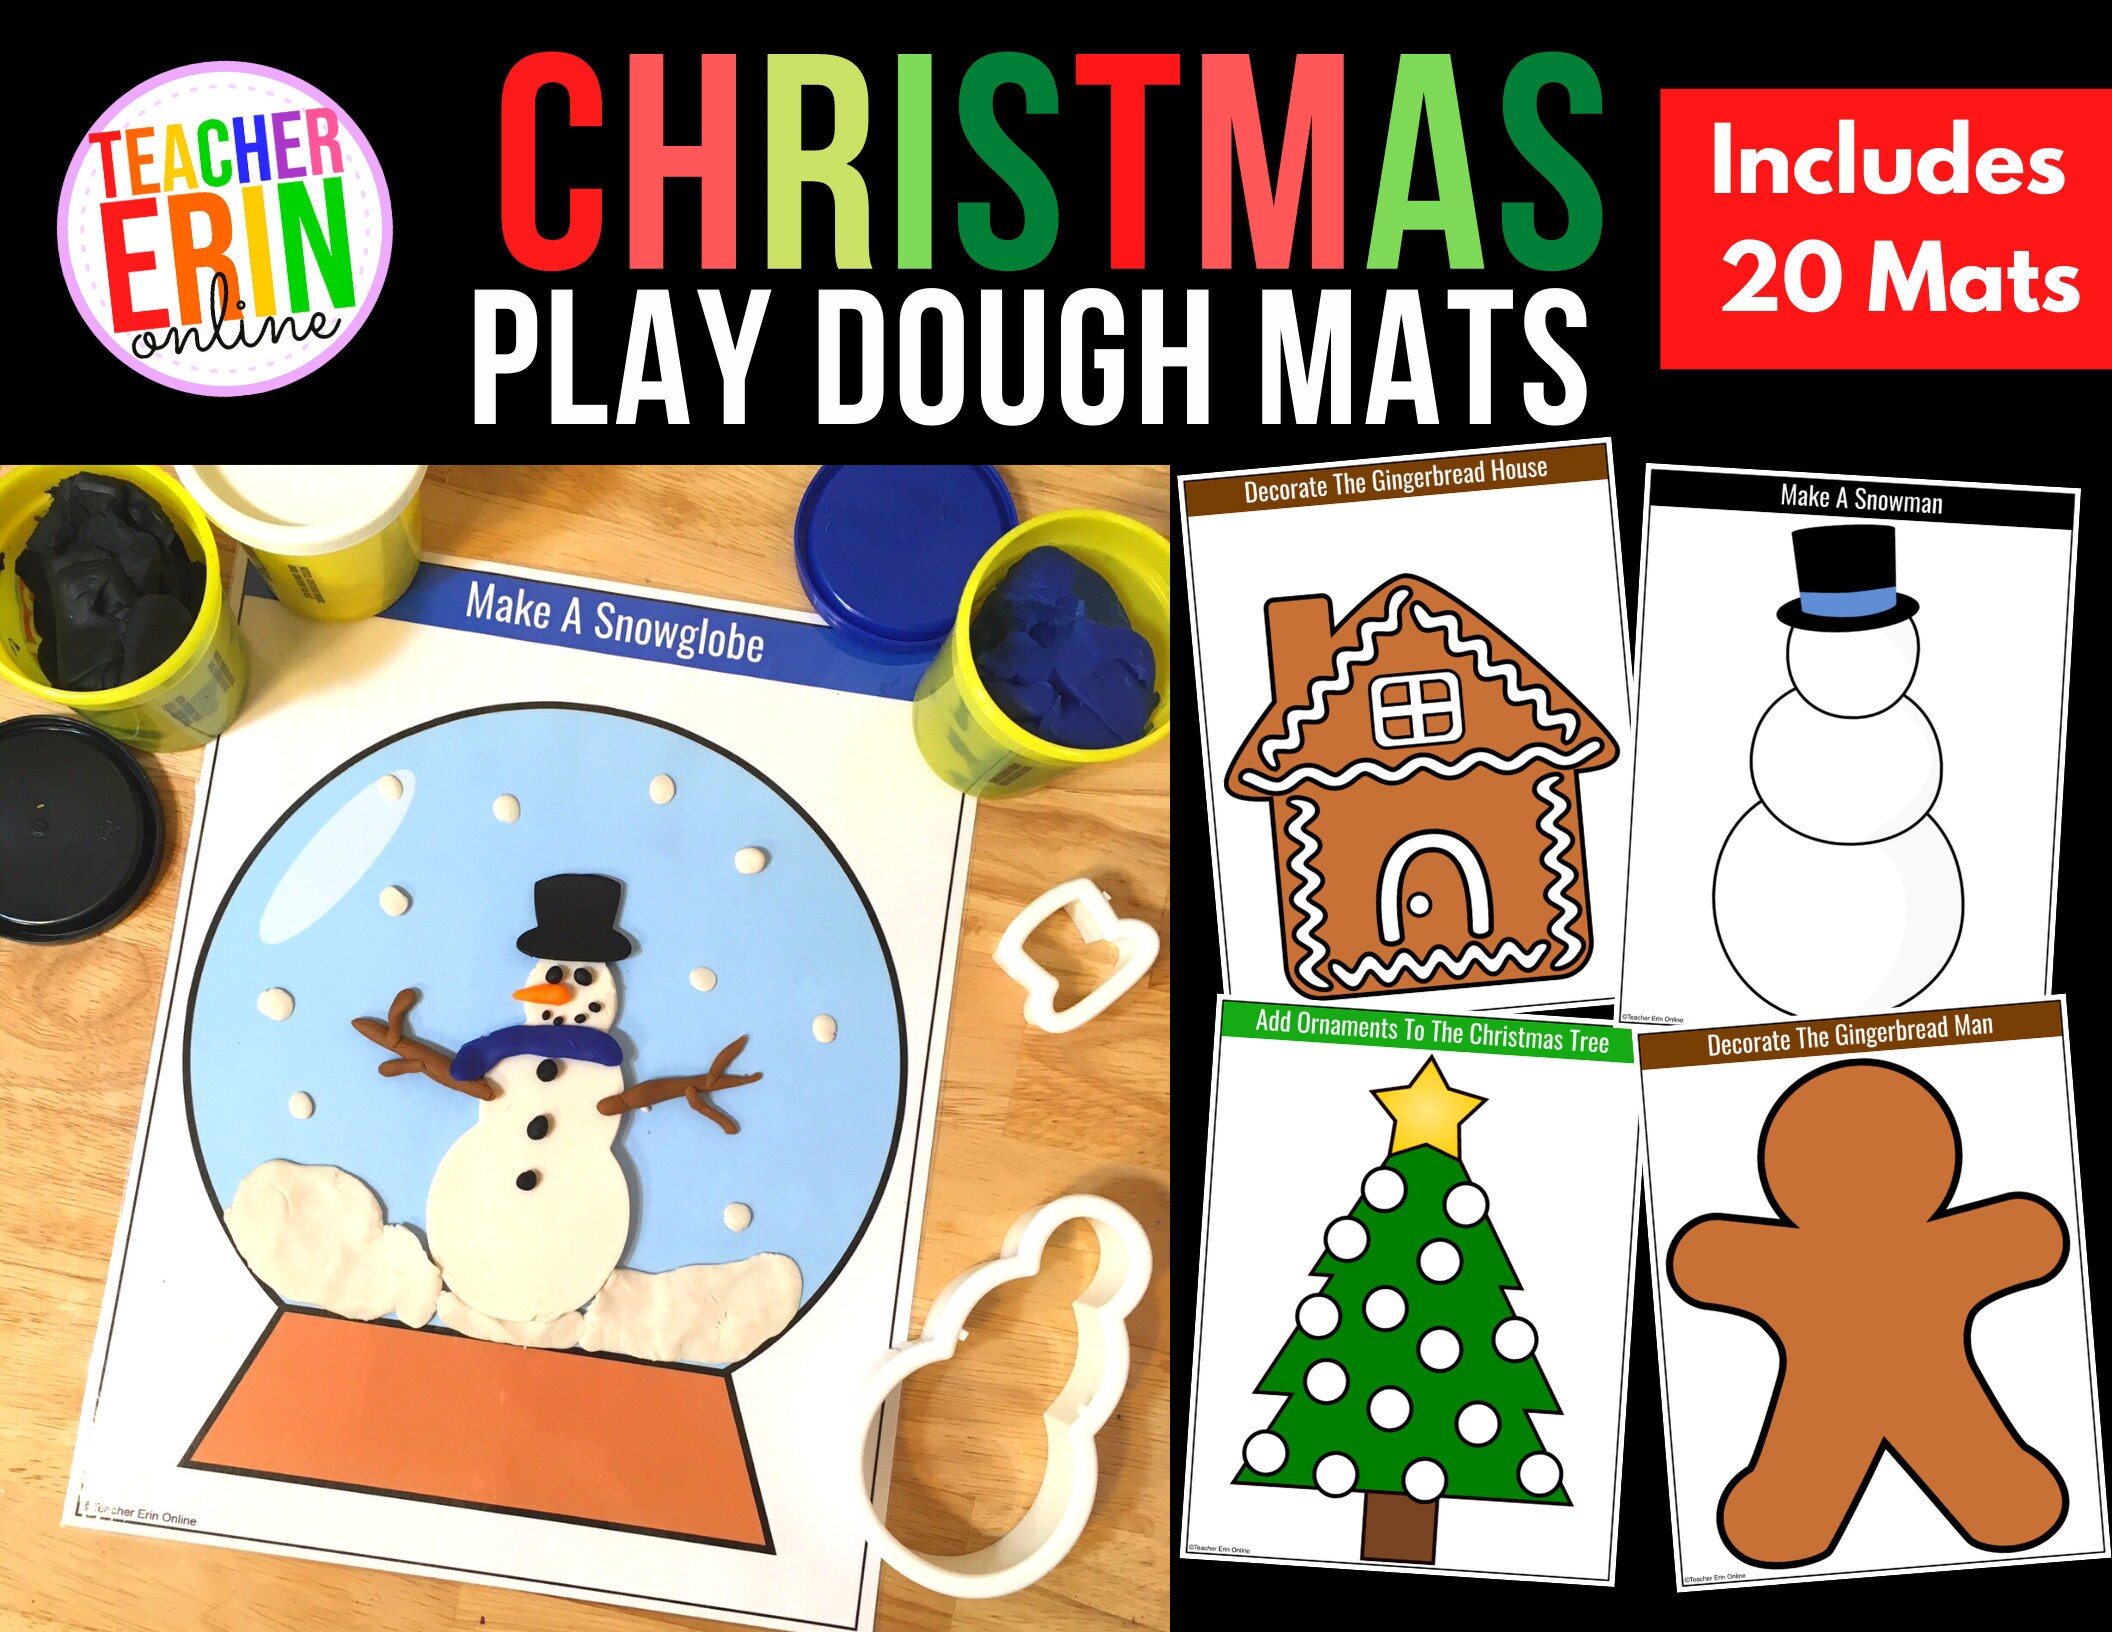 Printable Gingerbread Play Dough Mats - From ABCs to ACTs